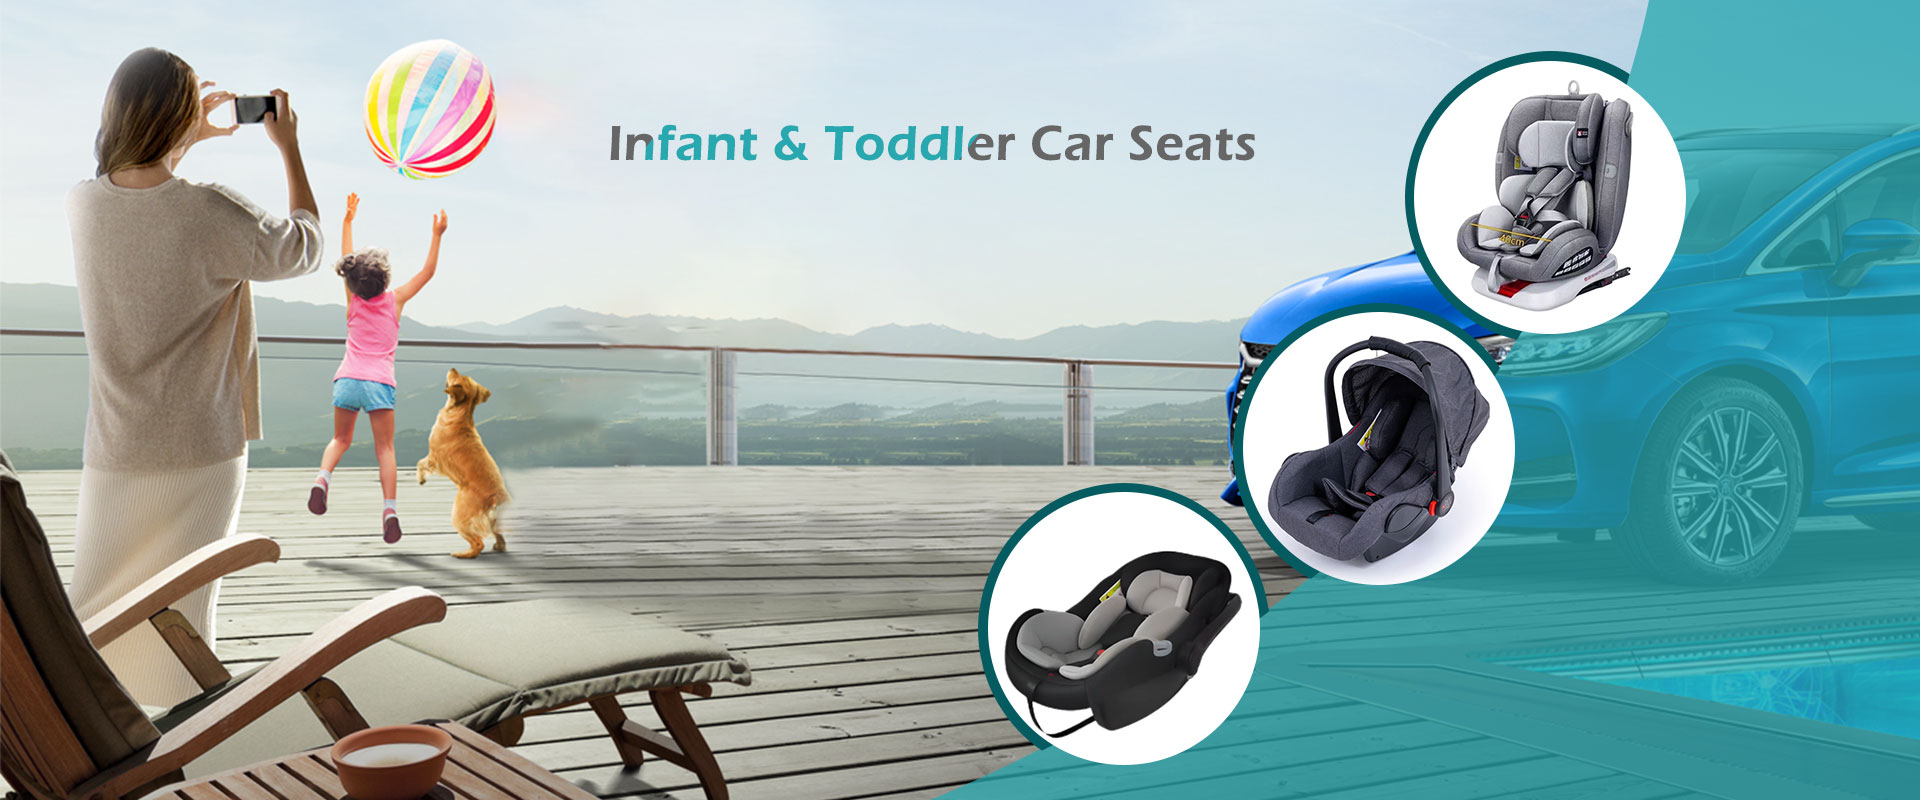 China Infant and Toddler Car Seats